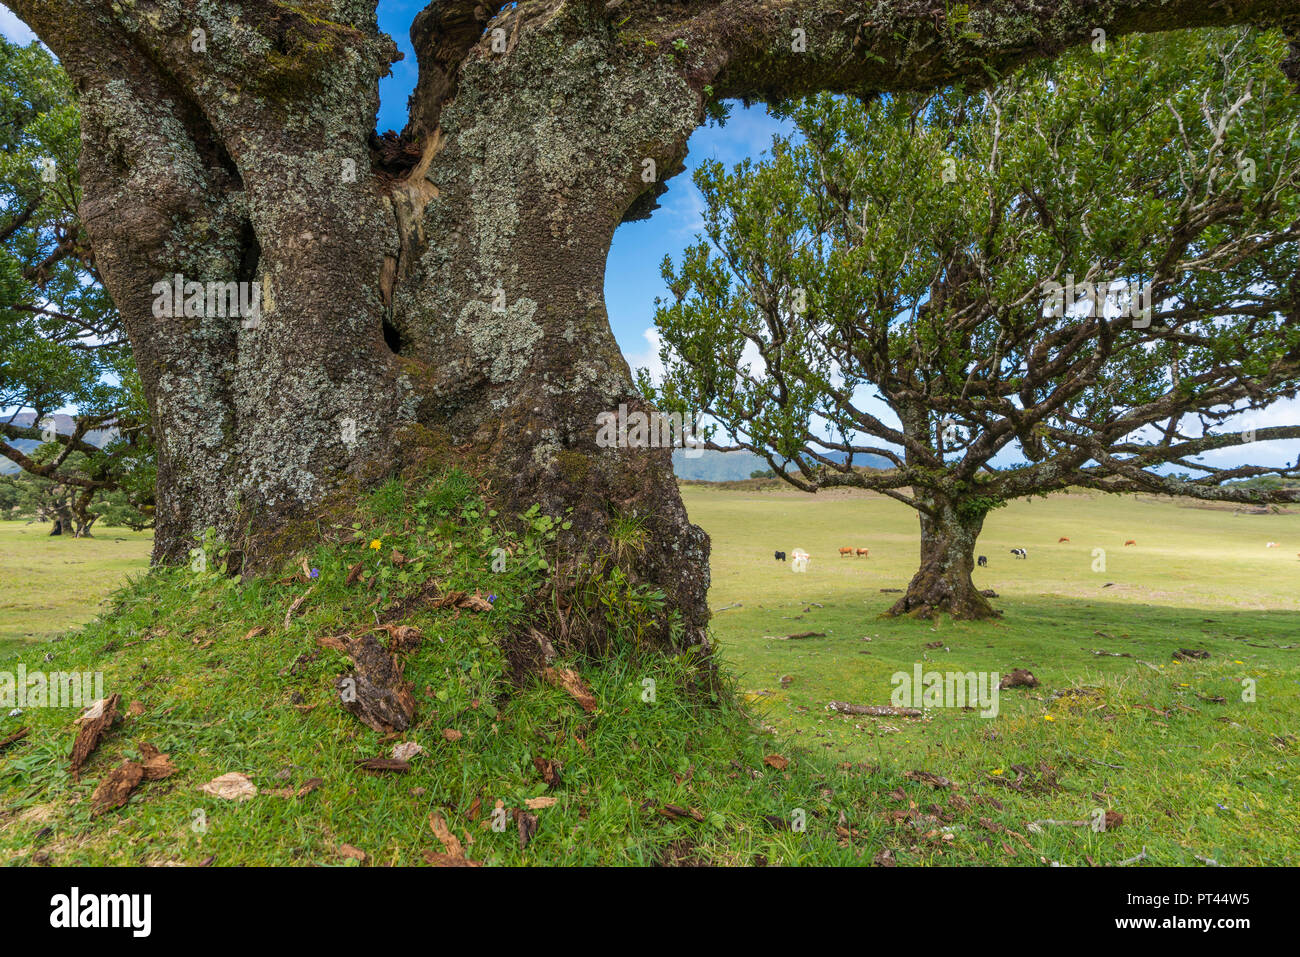 Laurel trees and cows grazing in the background, Laurisilva Forest, Fanal, Porto Moniz municipality, Madeira region, Portugal, Stock Photo